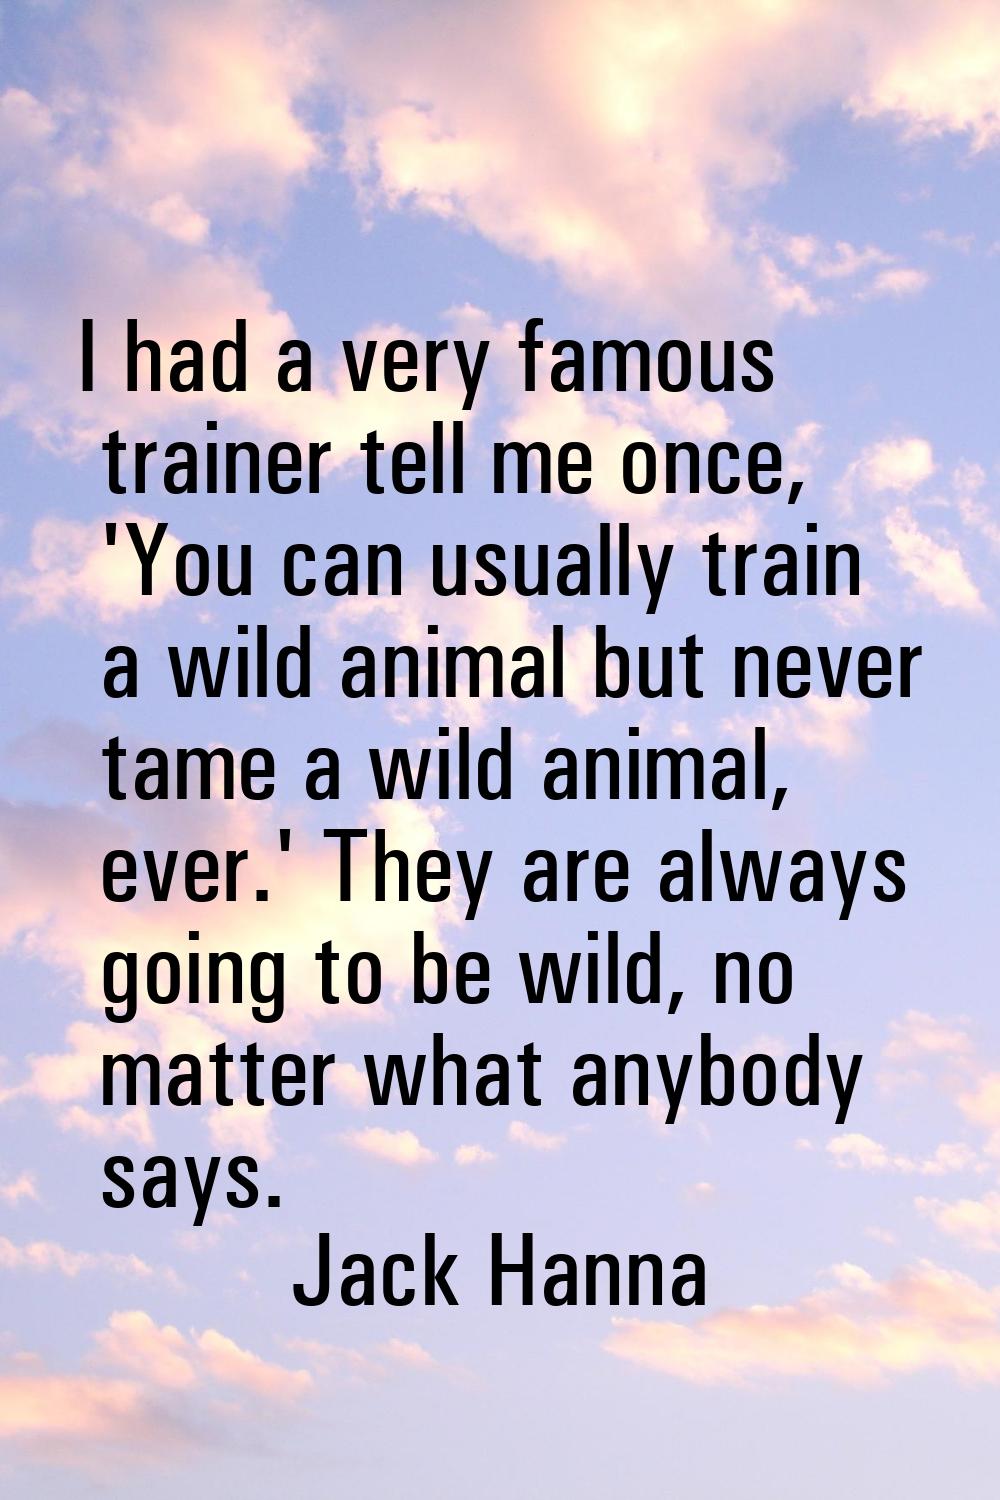 I had a very famous trainer tell me once, 'You can usually train a wild animal but never tame a wil